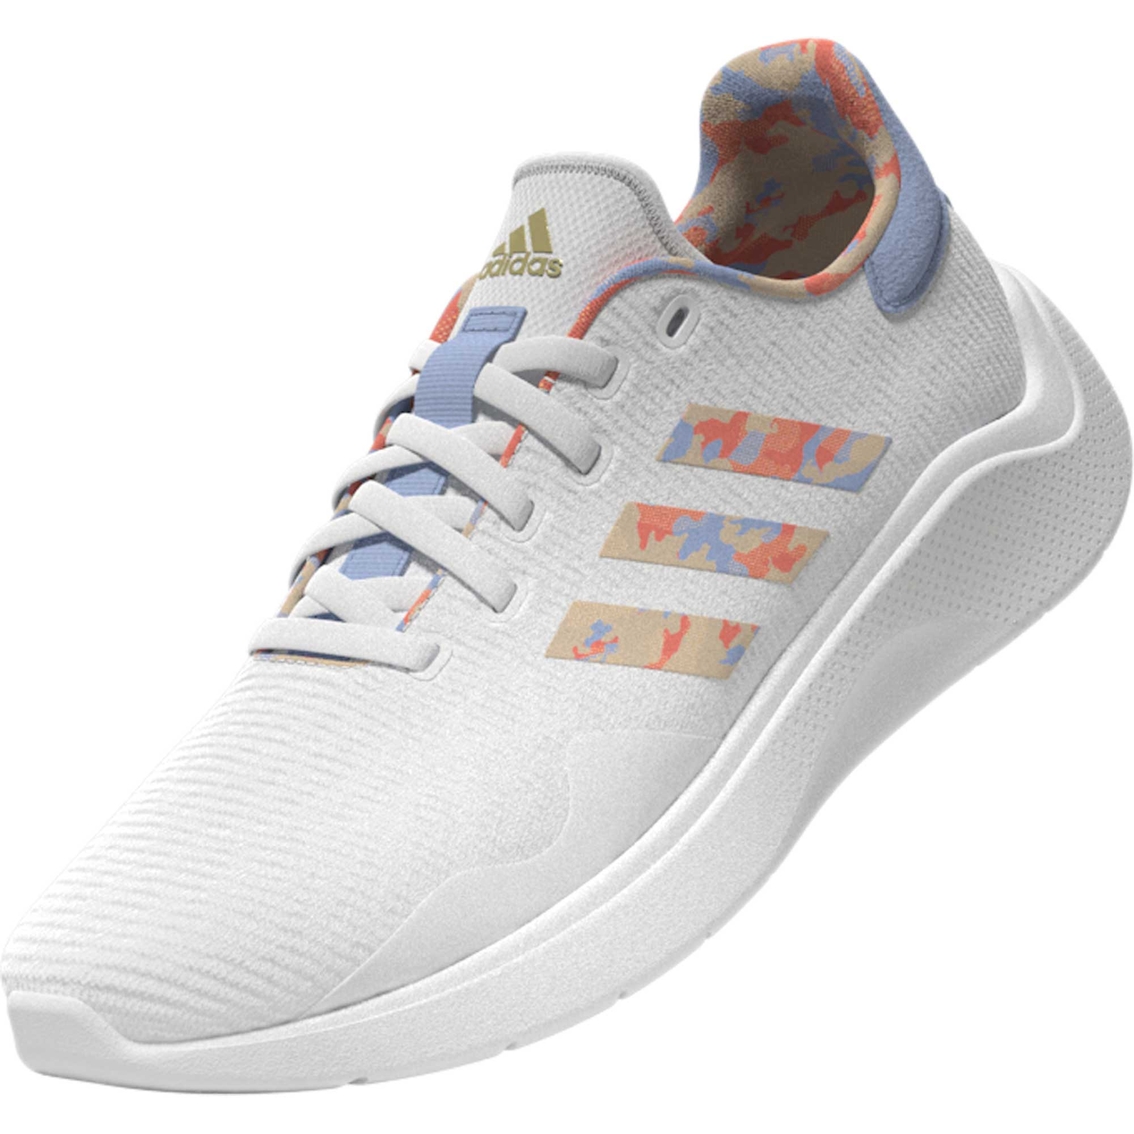 Adidas Women's Puremotion 2.0 Sneakers - Image 4 of 10